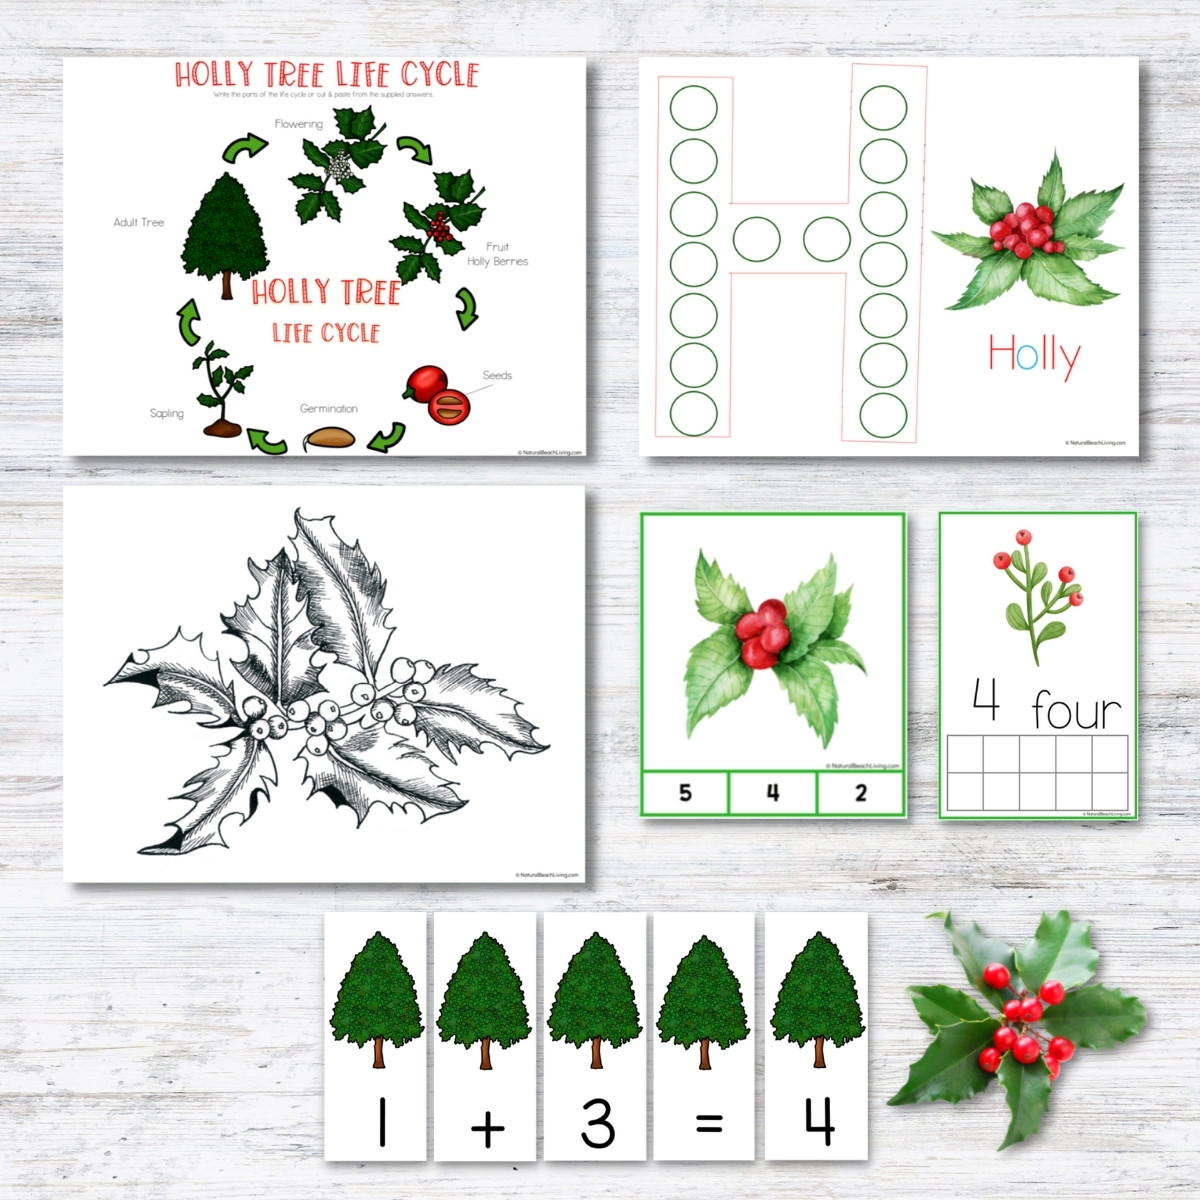 Holly Tree Theme Unit for 3-9 year olds. This is an amazing winter theme full of learning opportunities. You'll get Montessori 3 part cards, Holly Coloring Pages, Holly Tree Handwriting Pages, Winter Poetry and Writing Prompts, Holly Tree Life Cycle with Control Chart, Holly Tree Sequencing Cards, and Tons of early math skills activities, Holly Tree Preschool Theme